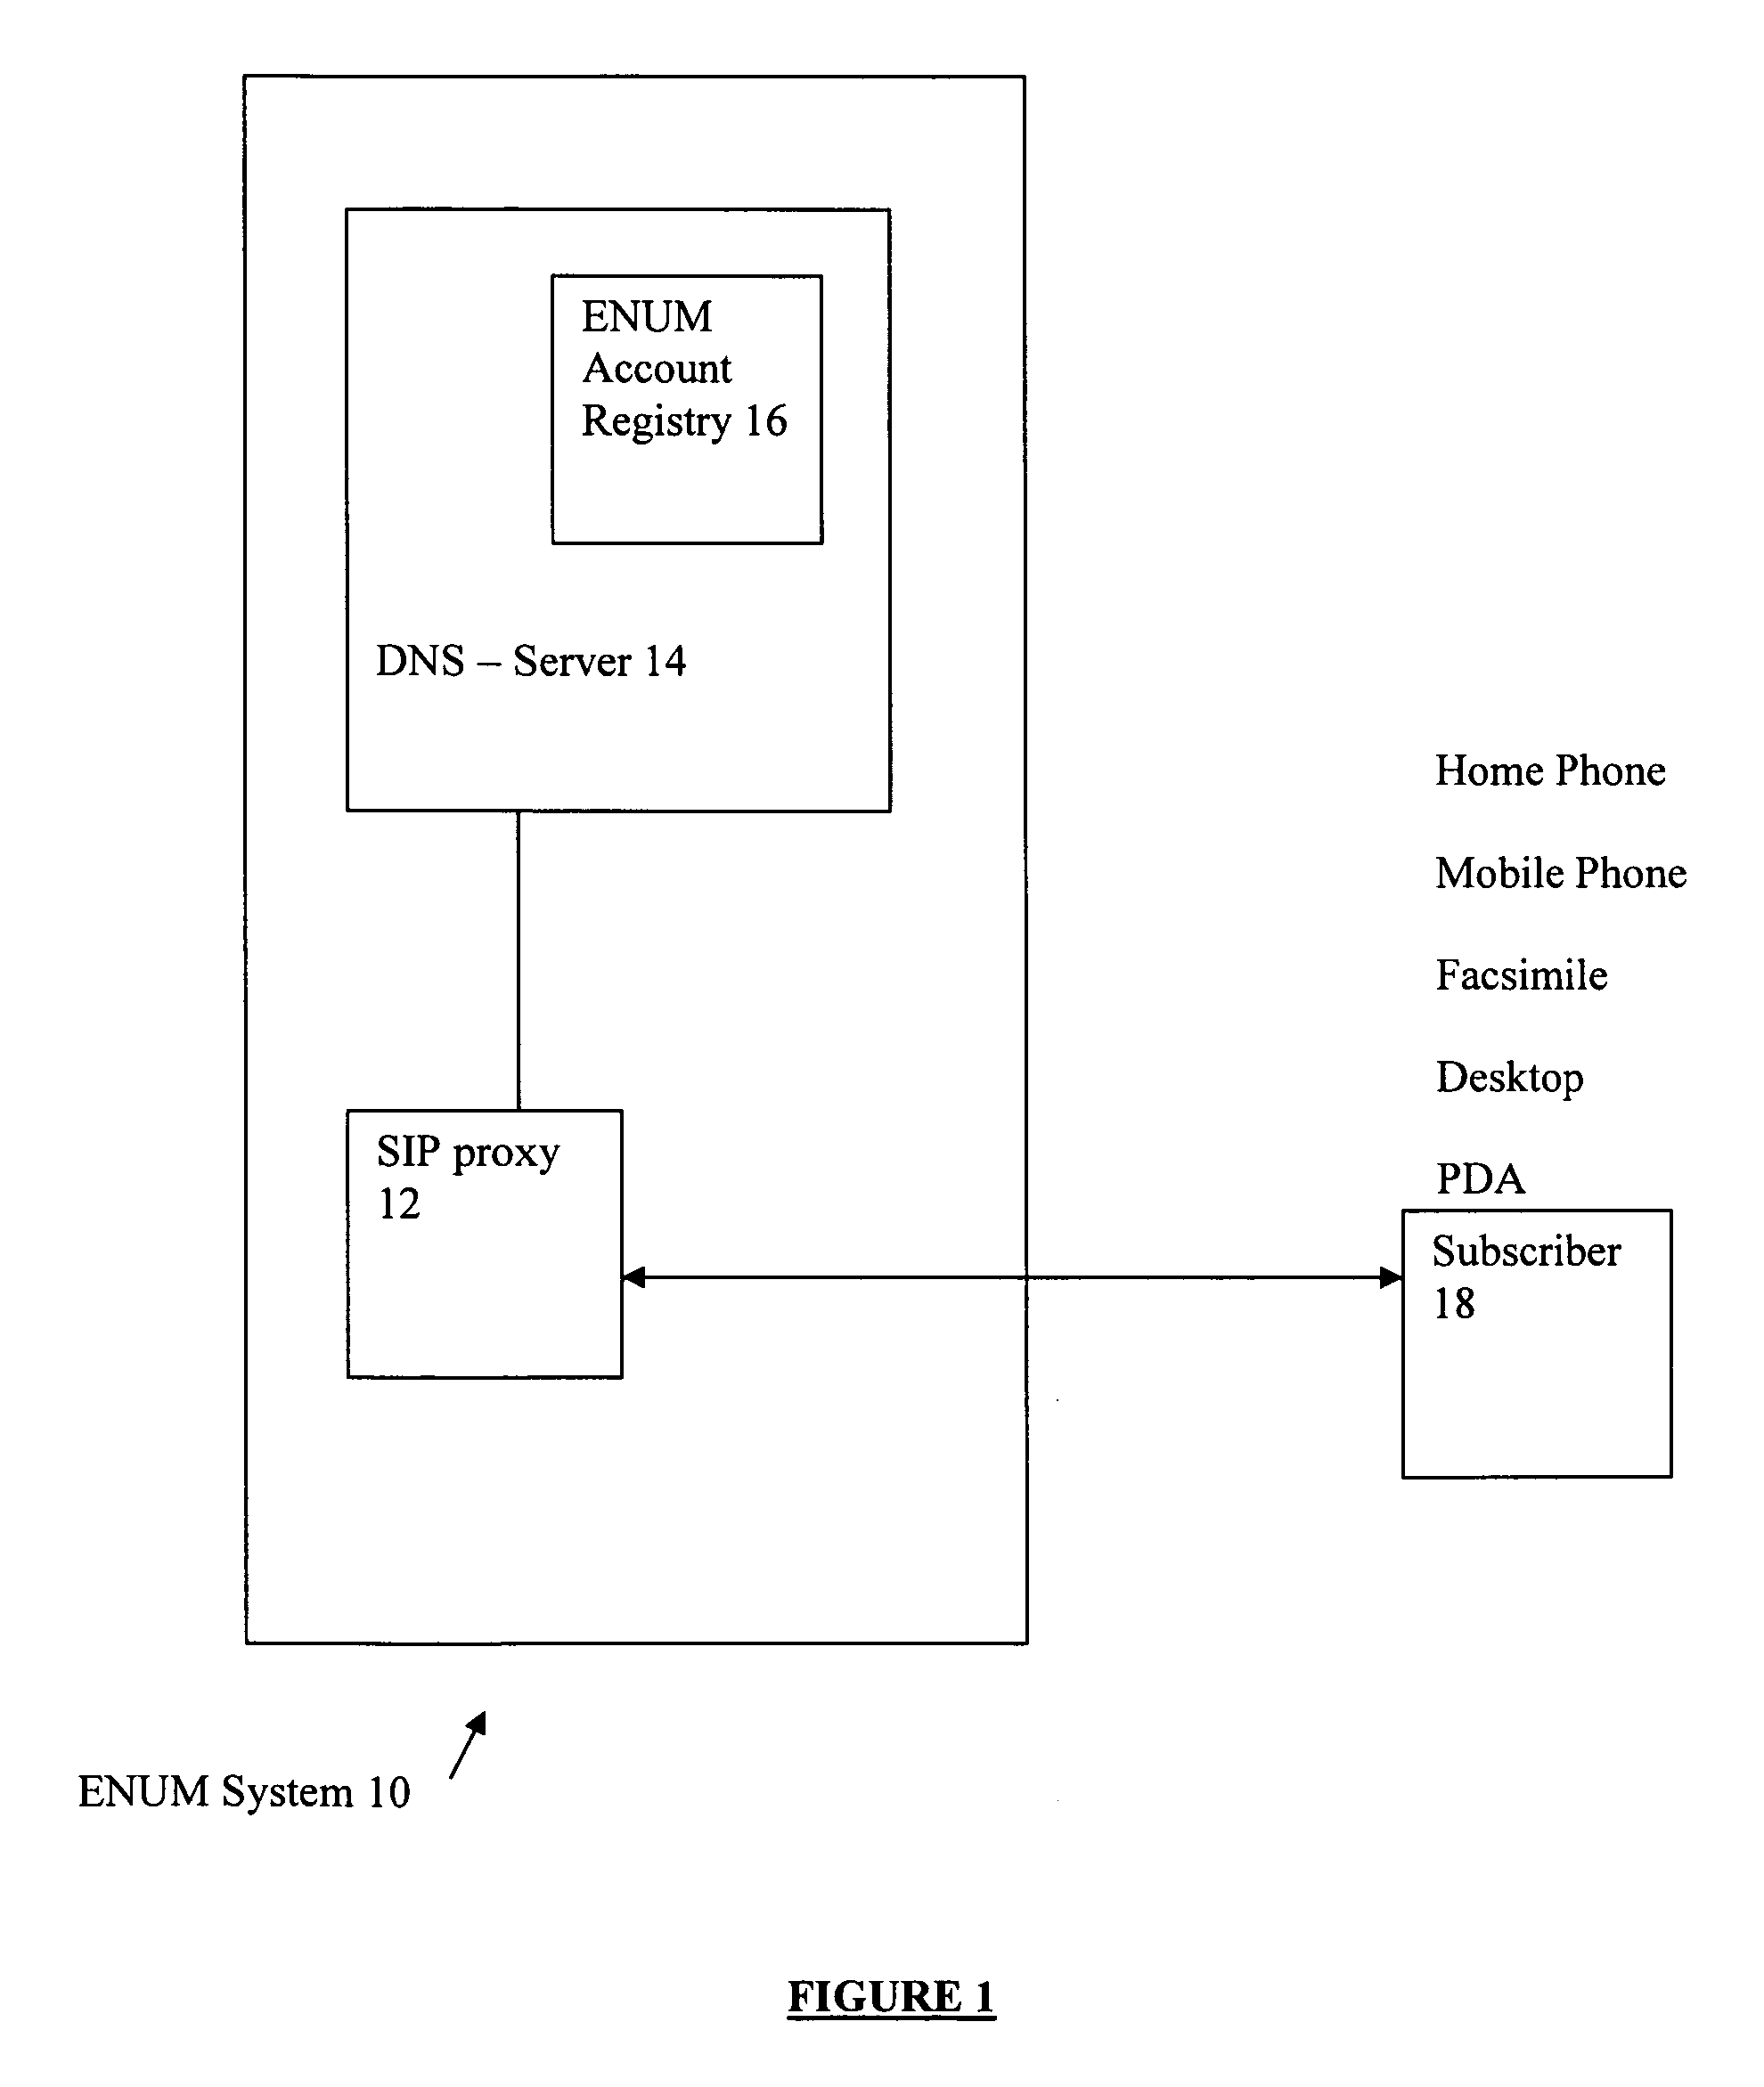 Enhanced directory assistance system with ENUM based features